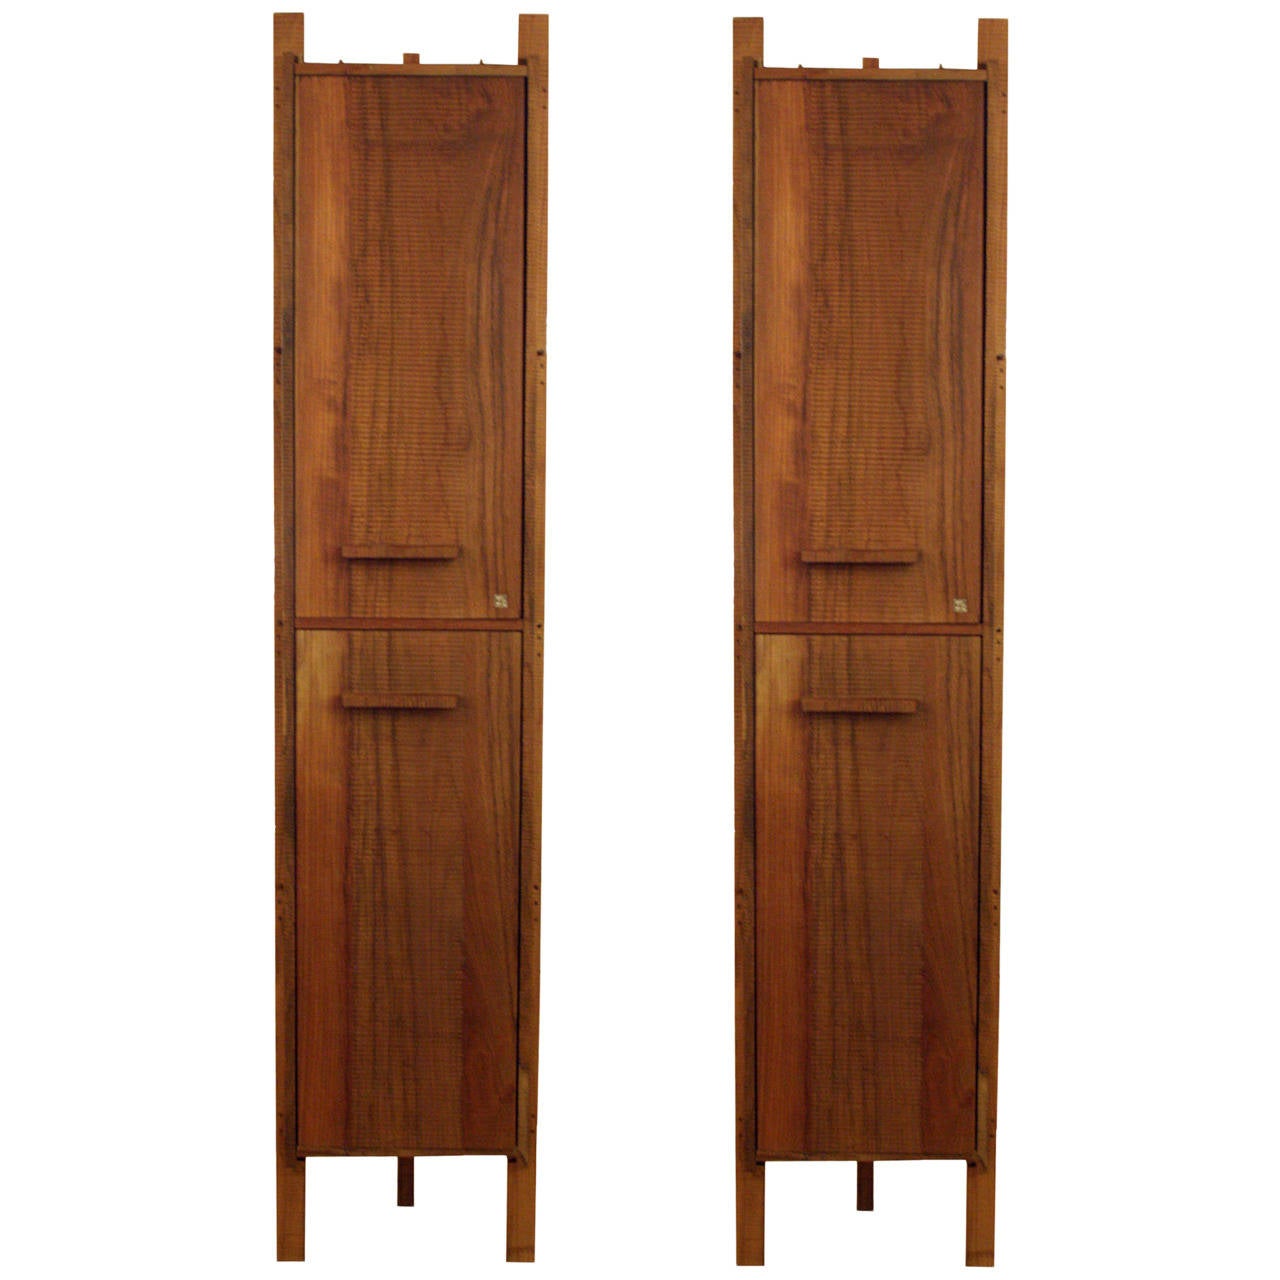 Pair of Unique Tall Storage Units by Anacleto Spazzapan For Sale